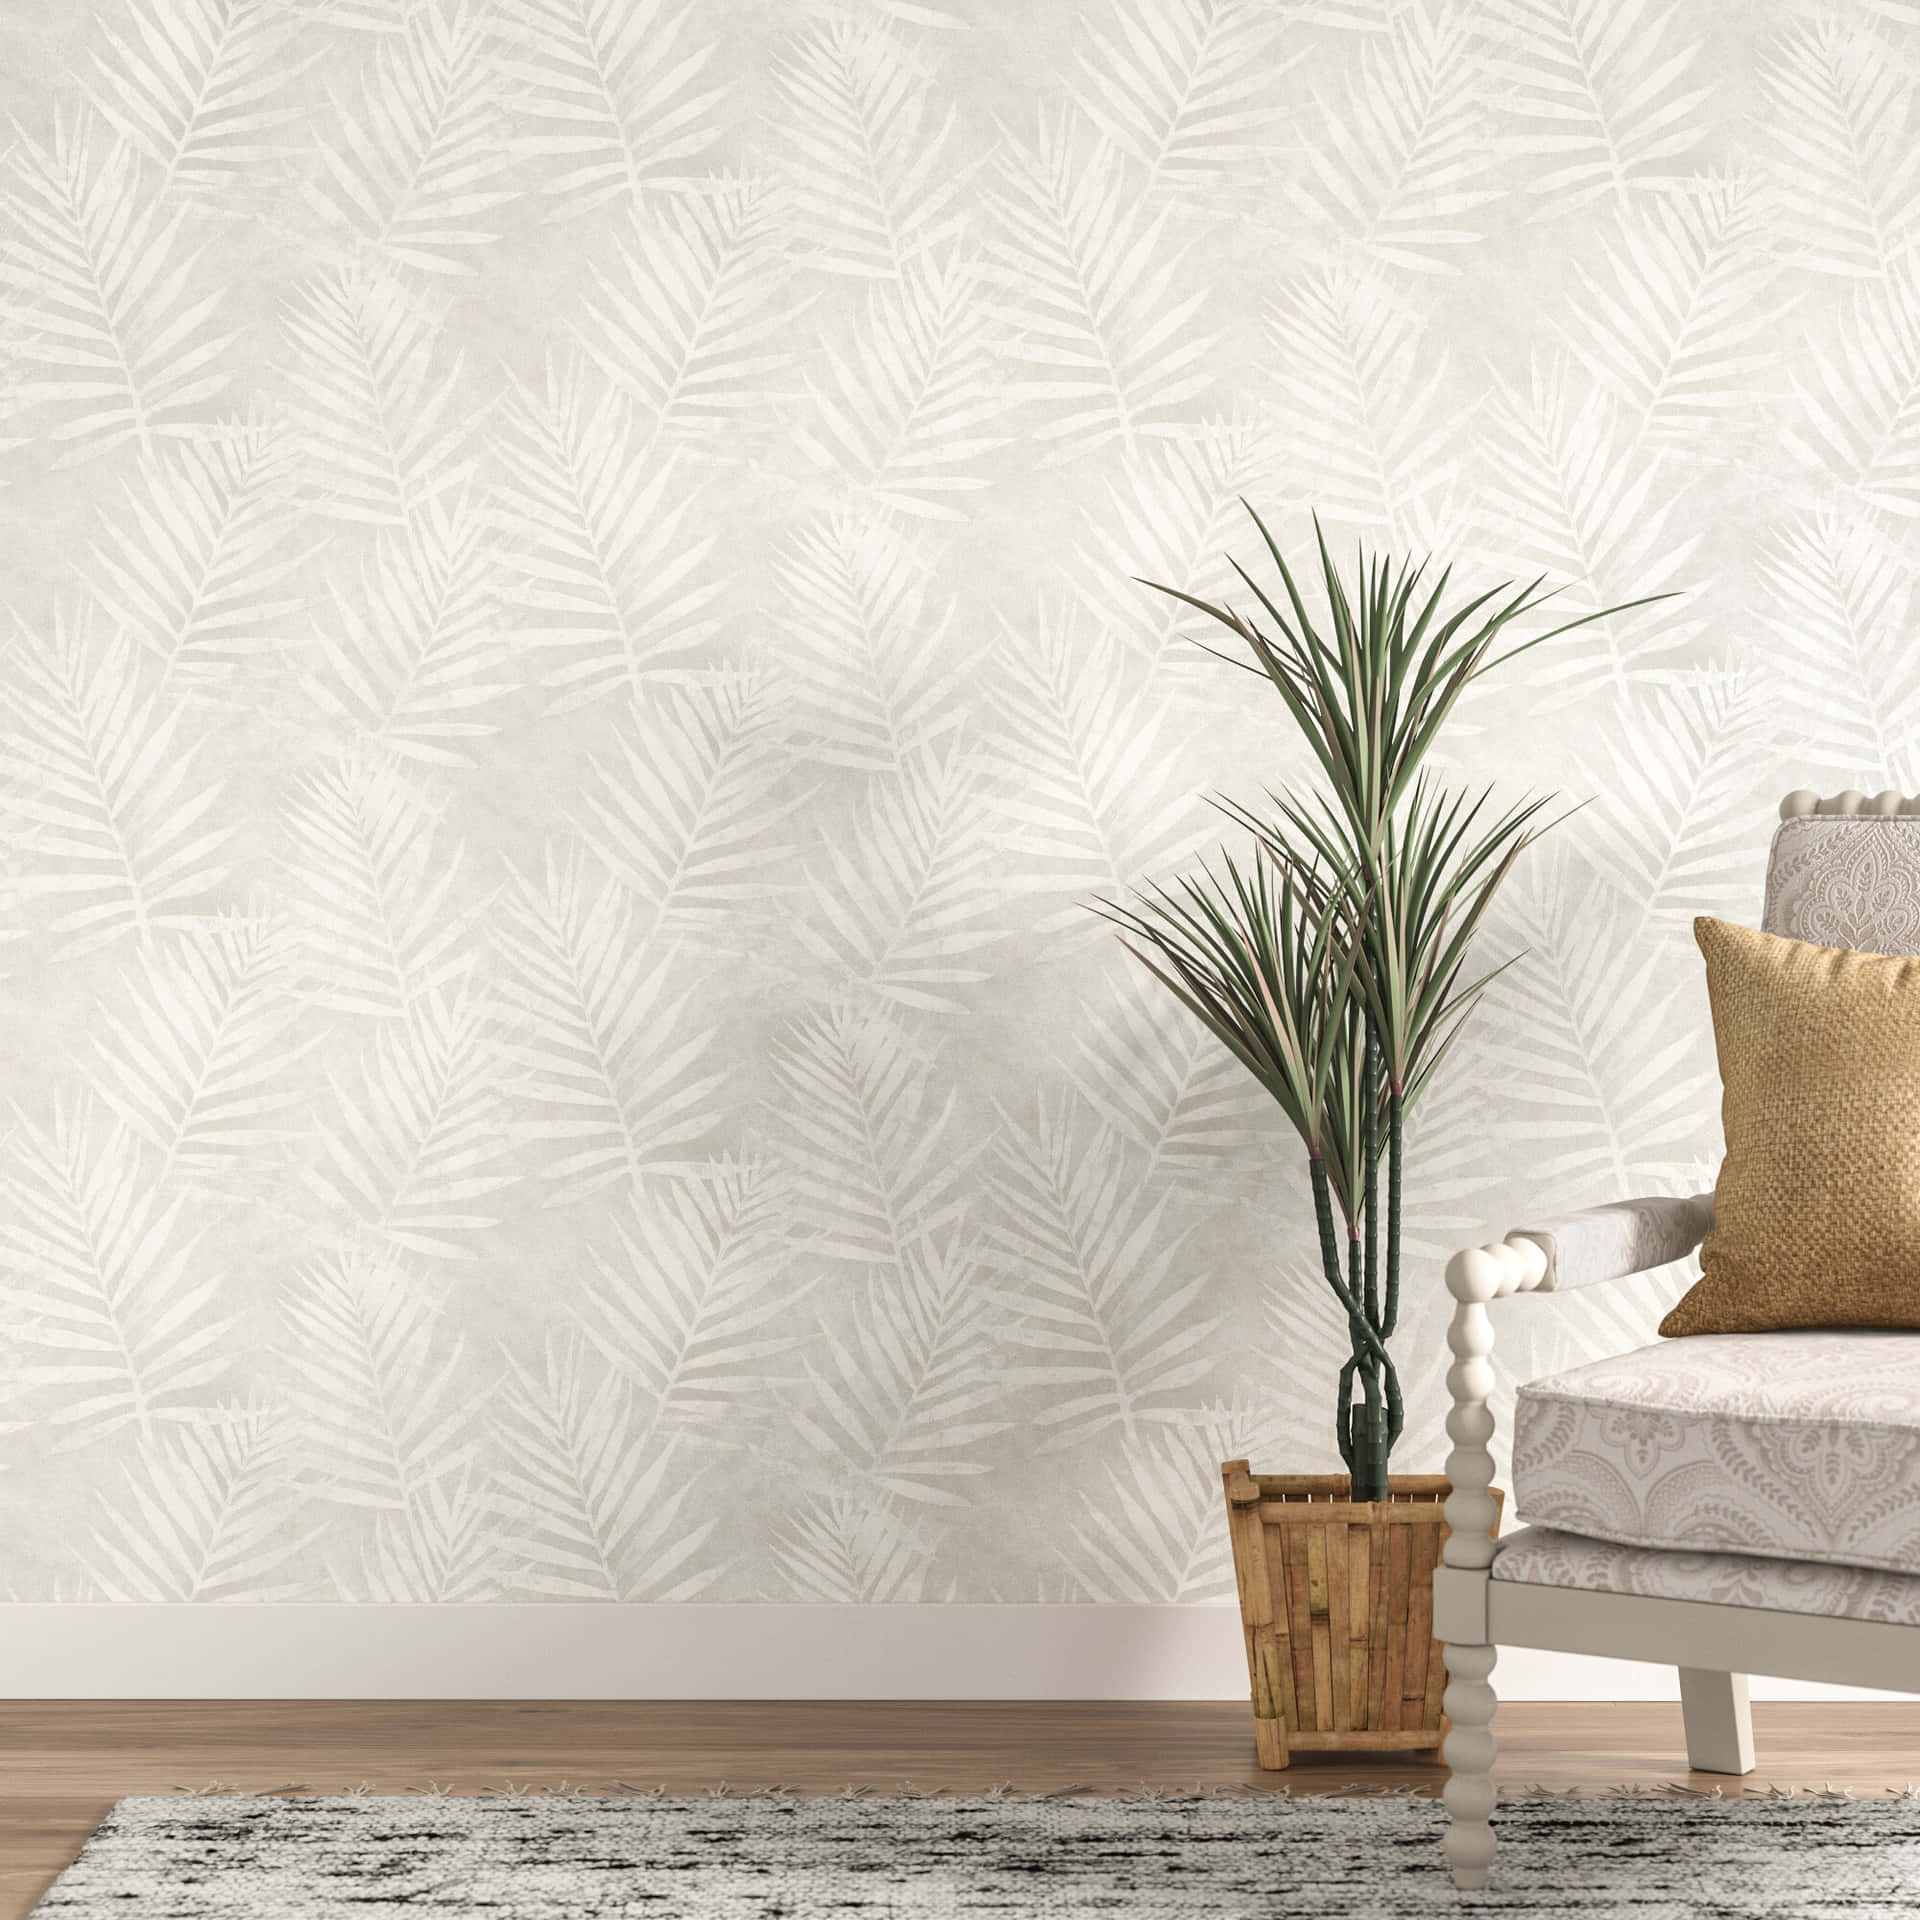 Wall With Subtle Design Alongside A Plant Wallpaper